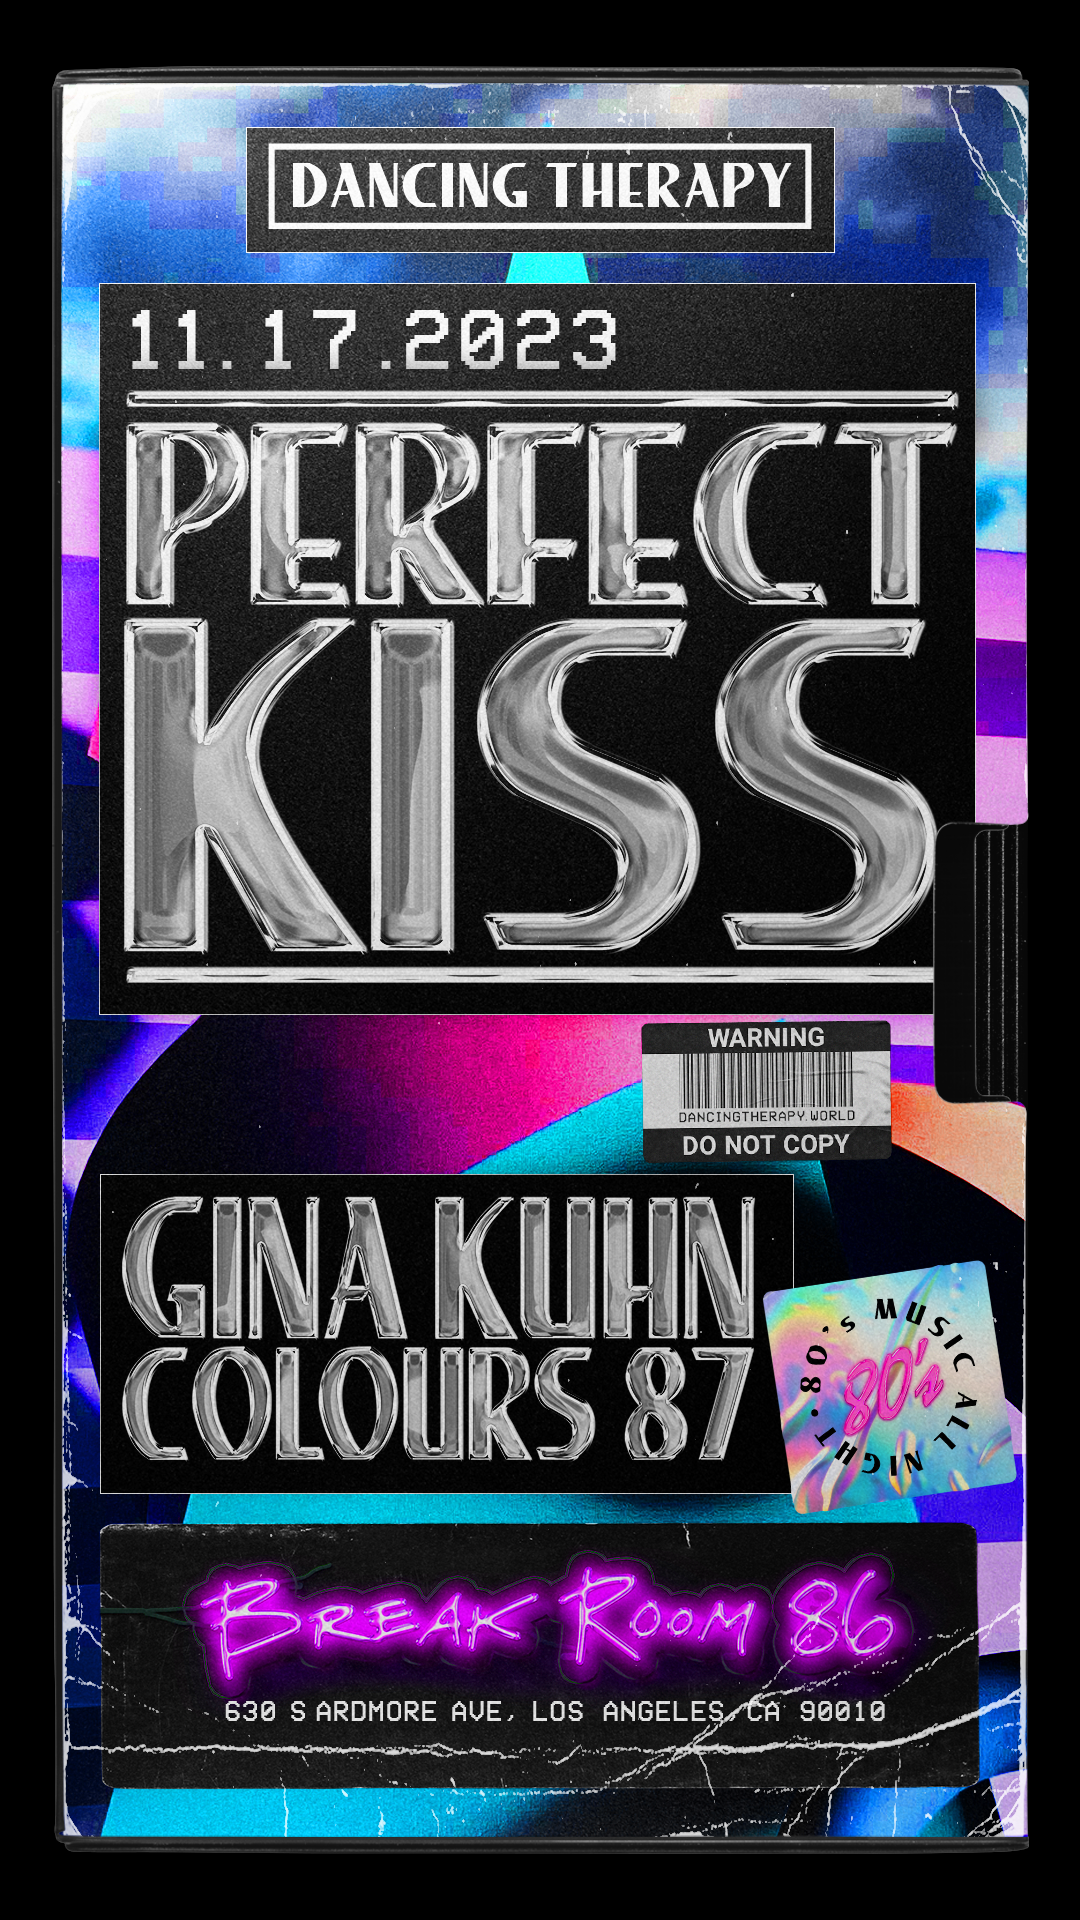 DANCING THERAPY: PEFECT KISS (A NEW WAVE PARTY) with GINA KUHN - Página trasera